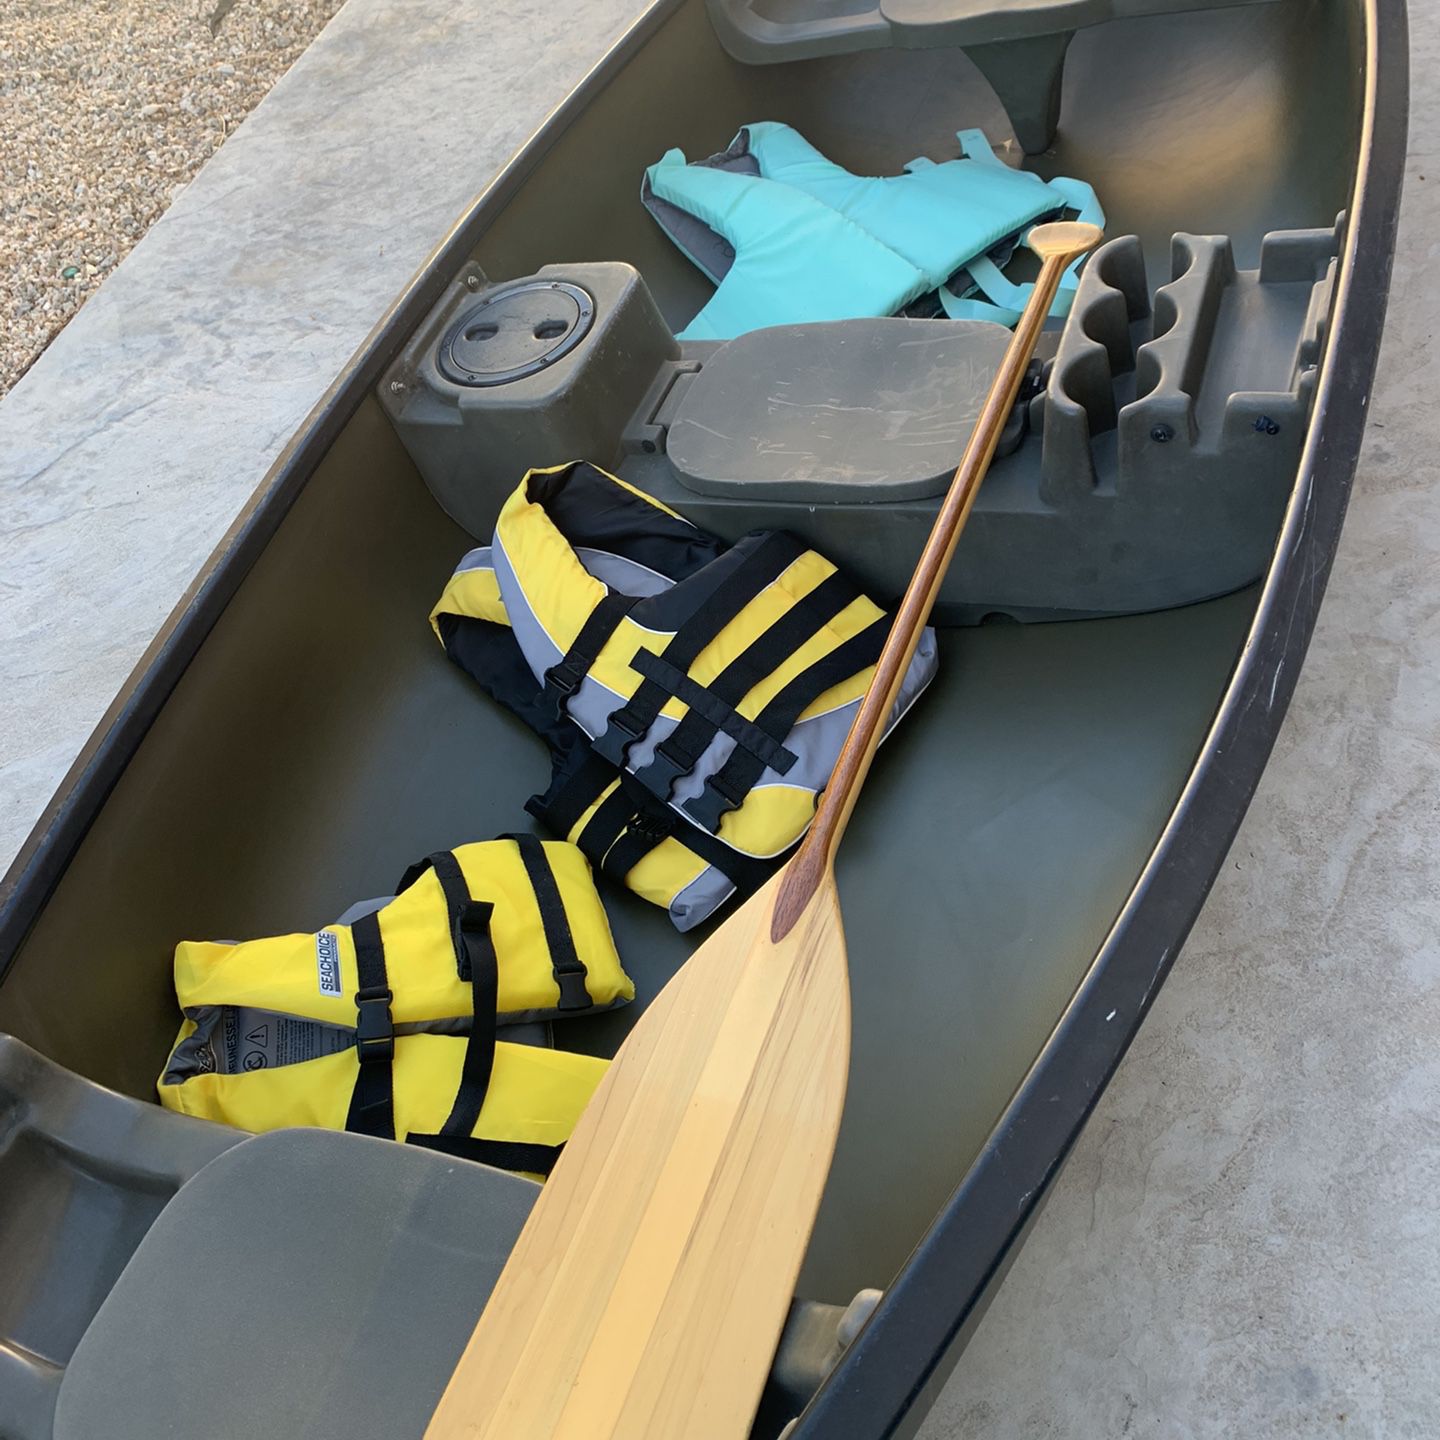 FISHING CANOE  FOR SALE IN EXCELLENT CONDITION 